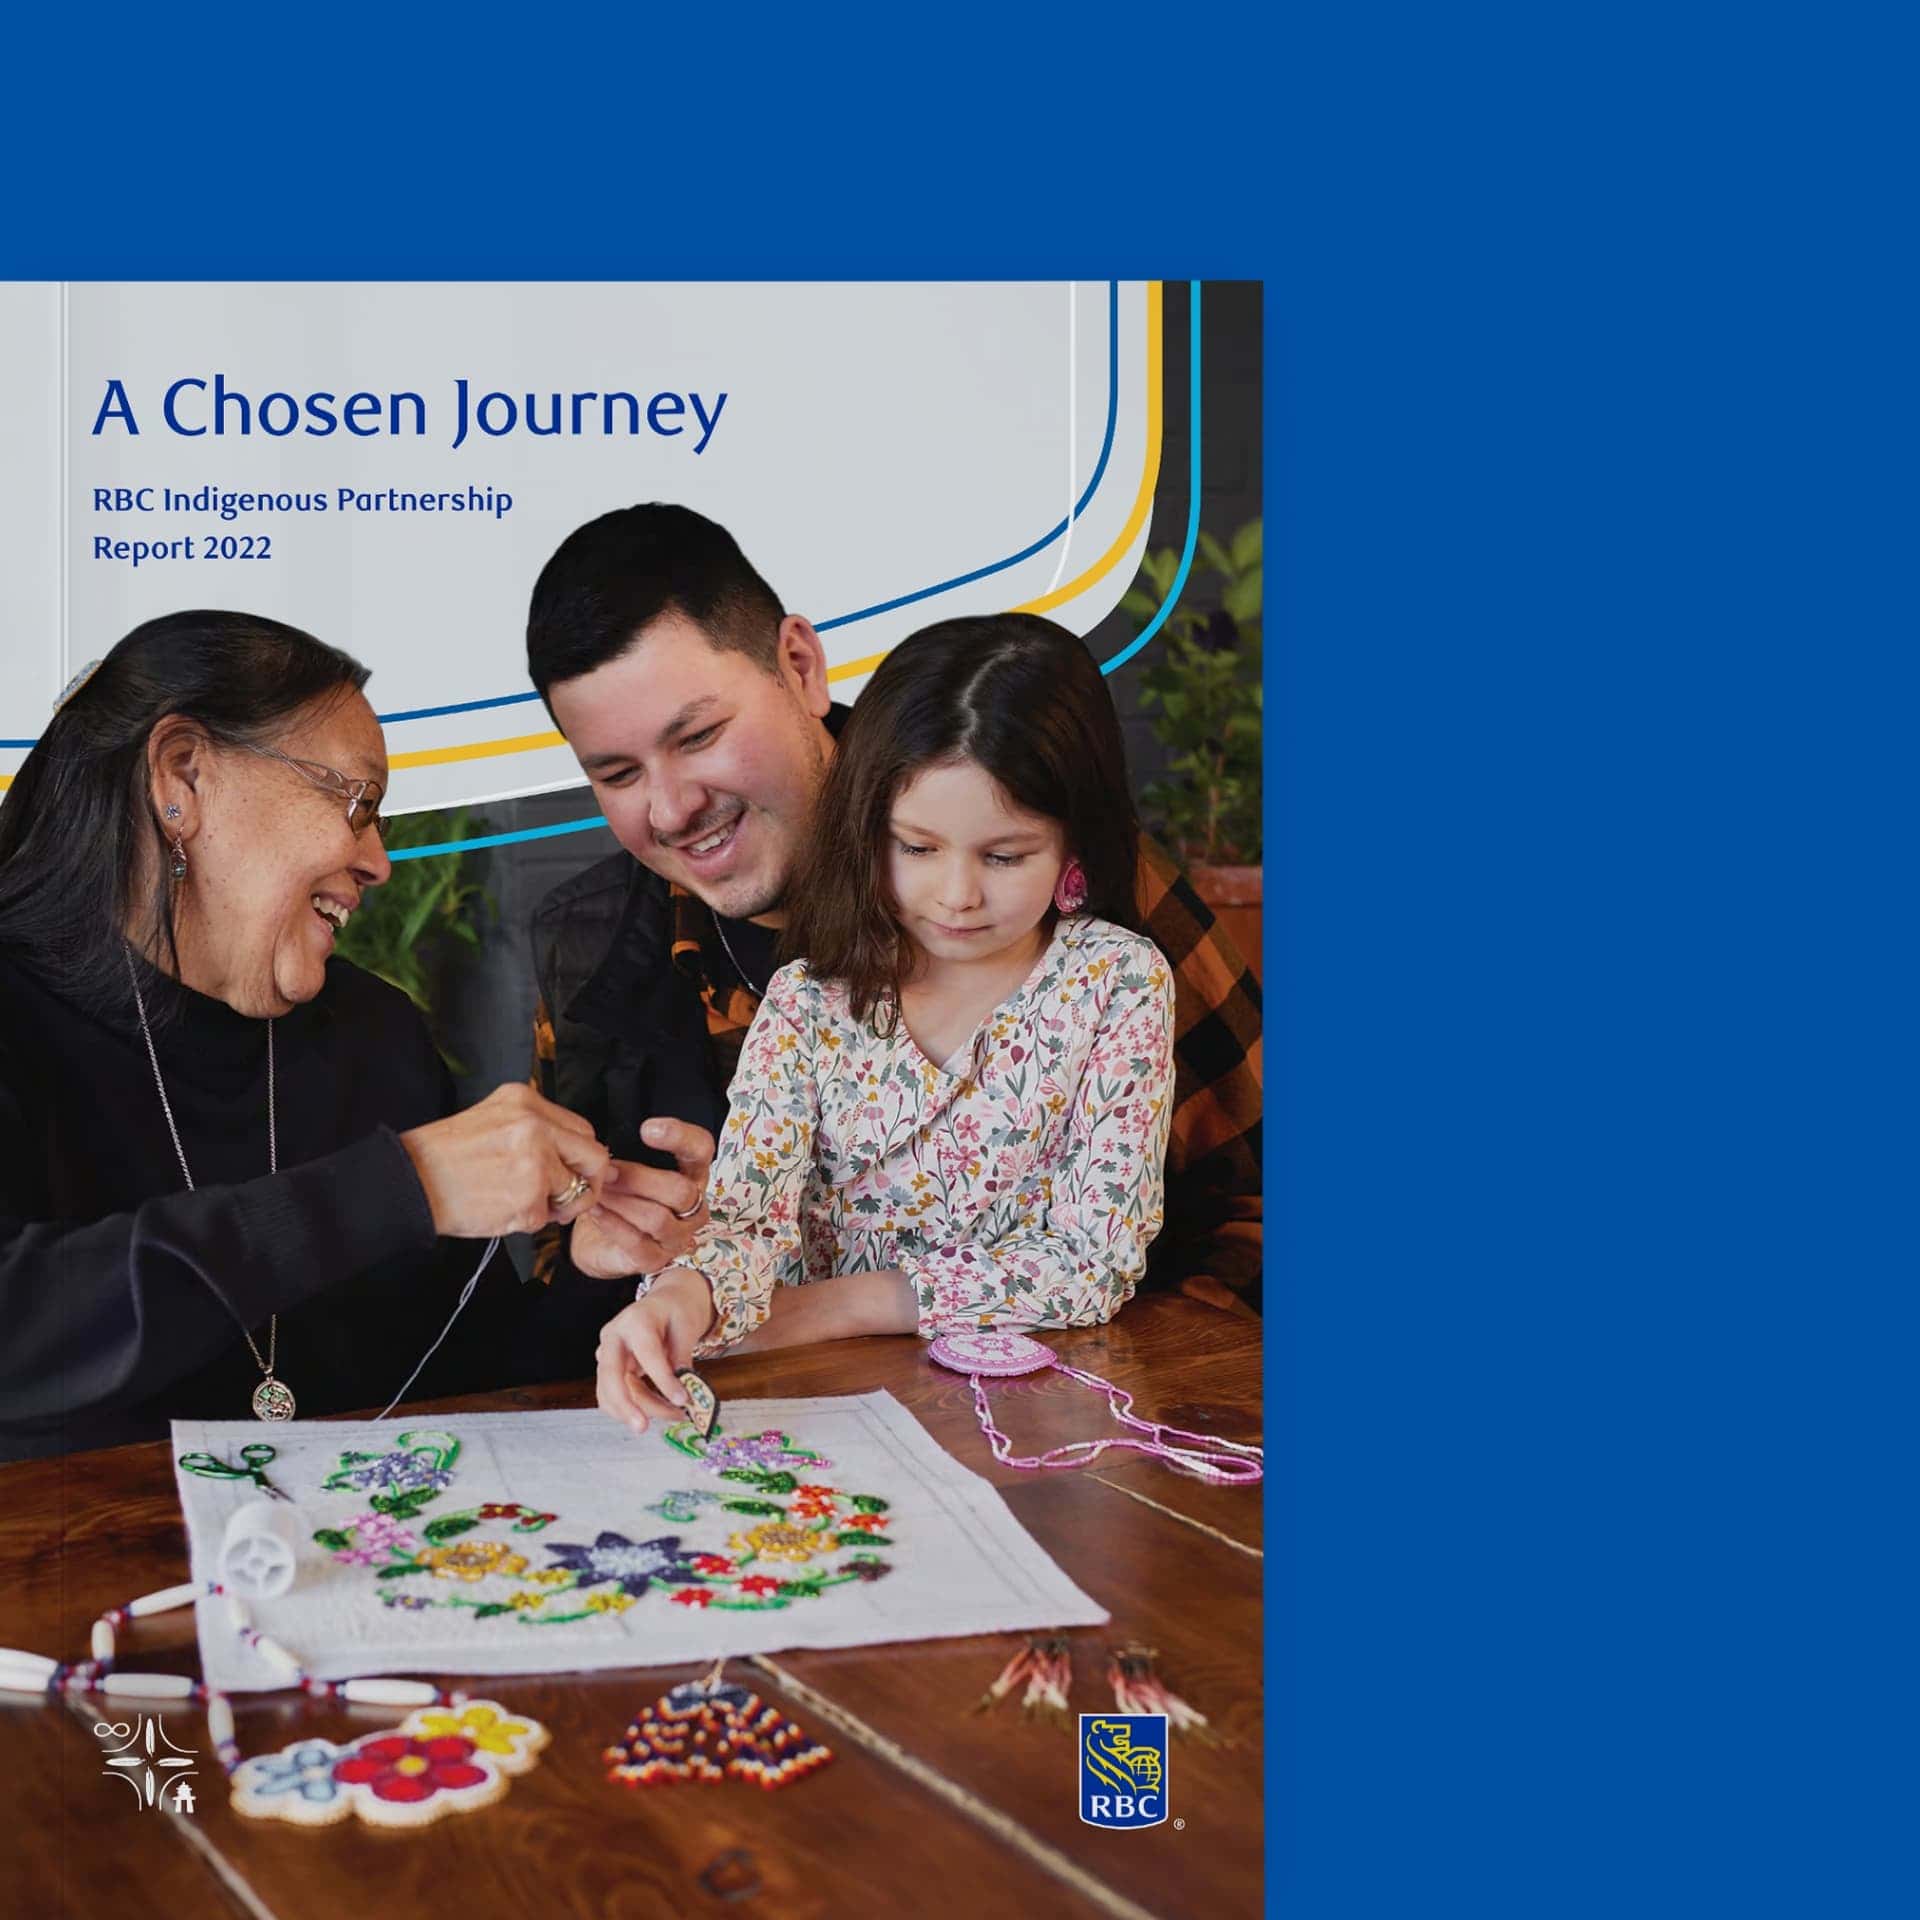 The front page of A Chosen Journey is shown facing the viewer on a blue background.